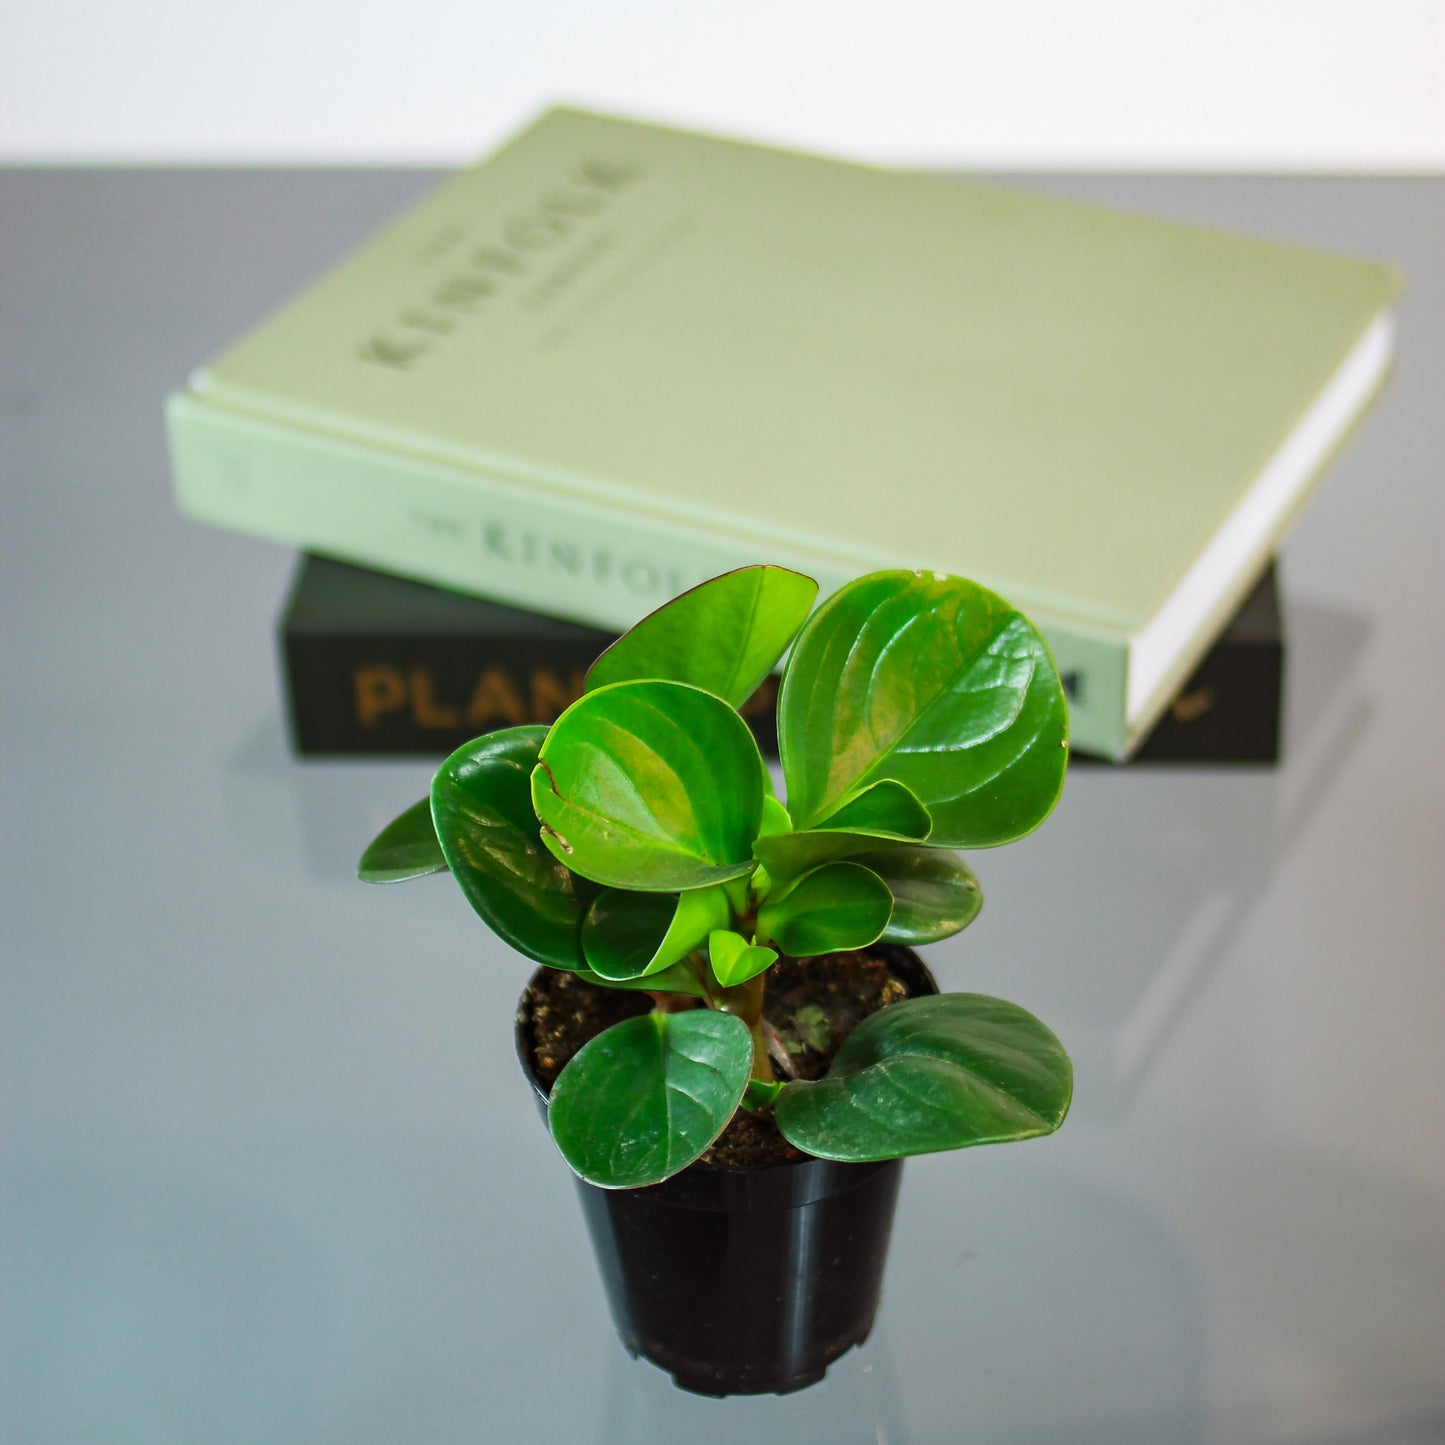 Green Baby Rubber Plant (Peperomia obtusifolia) in a 4 inch pot. Indoor plant for sale by Promise Supply for delivery and pickup in Toronto